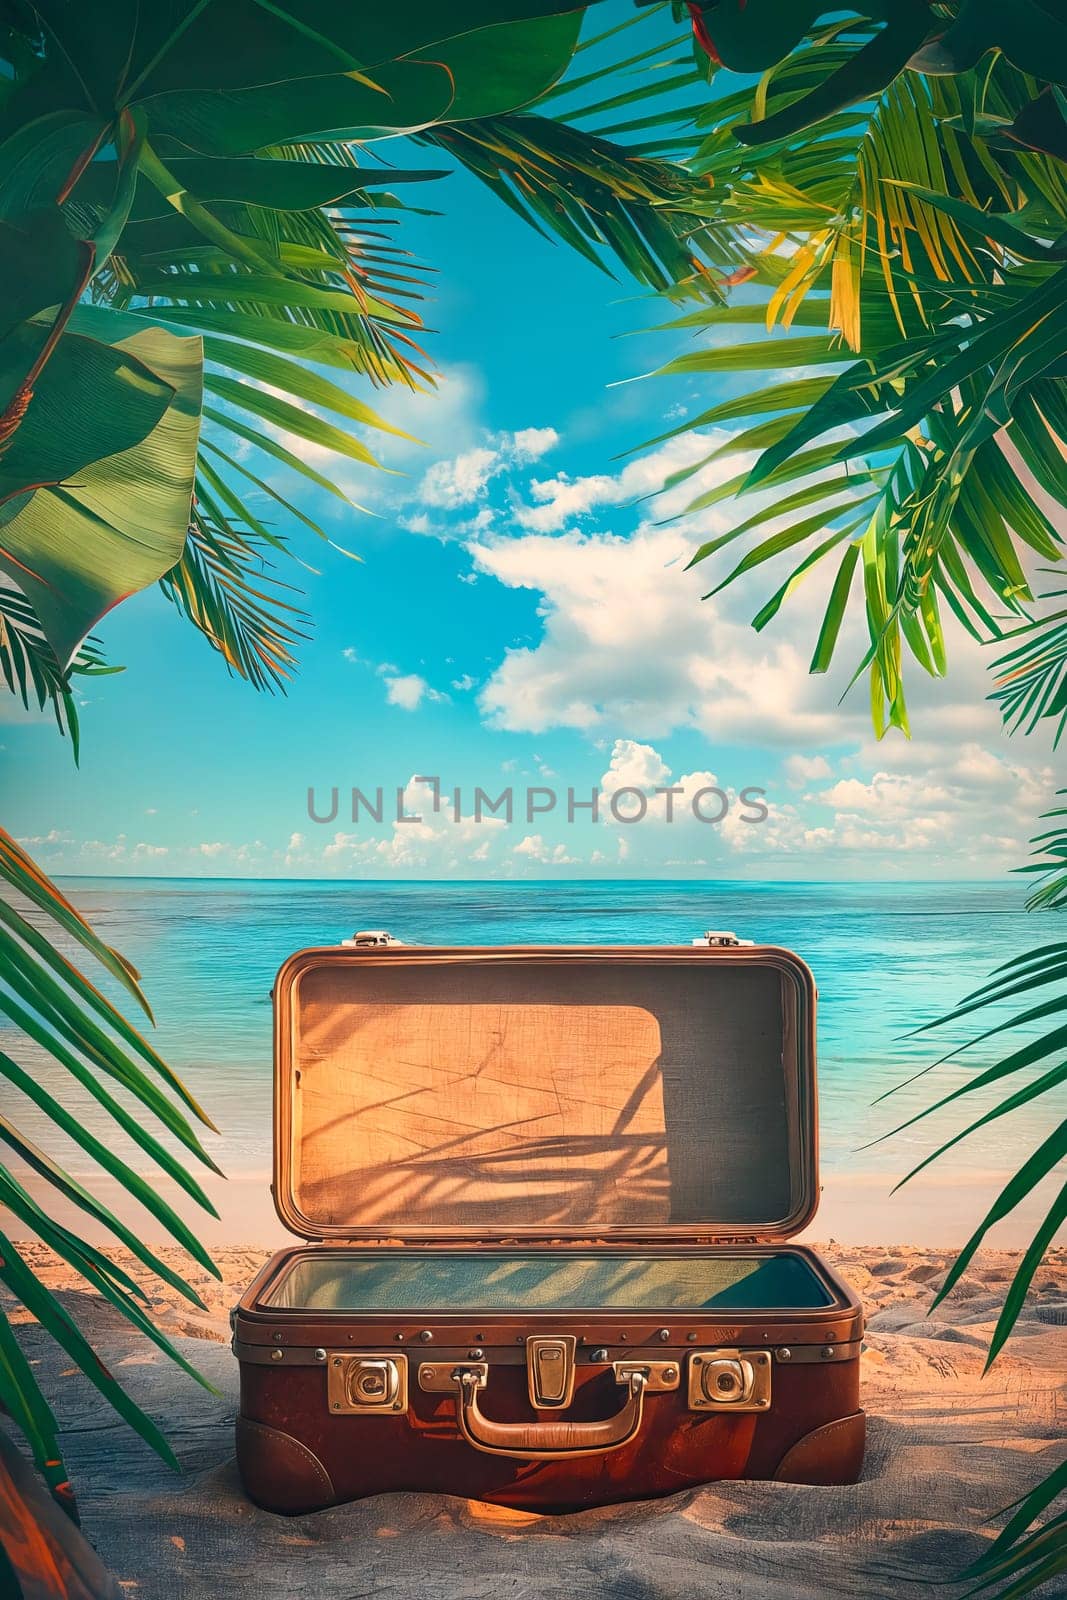 A suitcase is sitting on the beach, with the ocean in the background. The scene is peaceful and relaxing, with the suitcase as the main focus. Generative AI